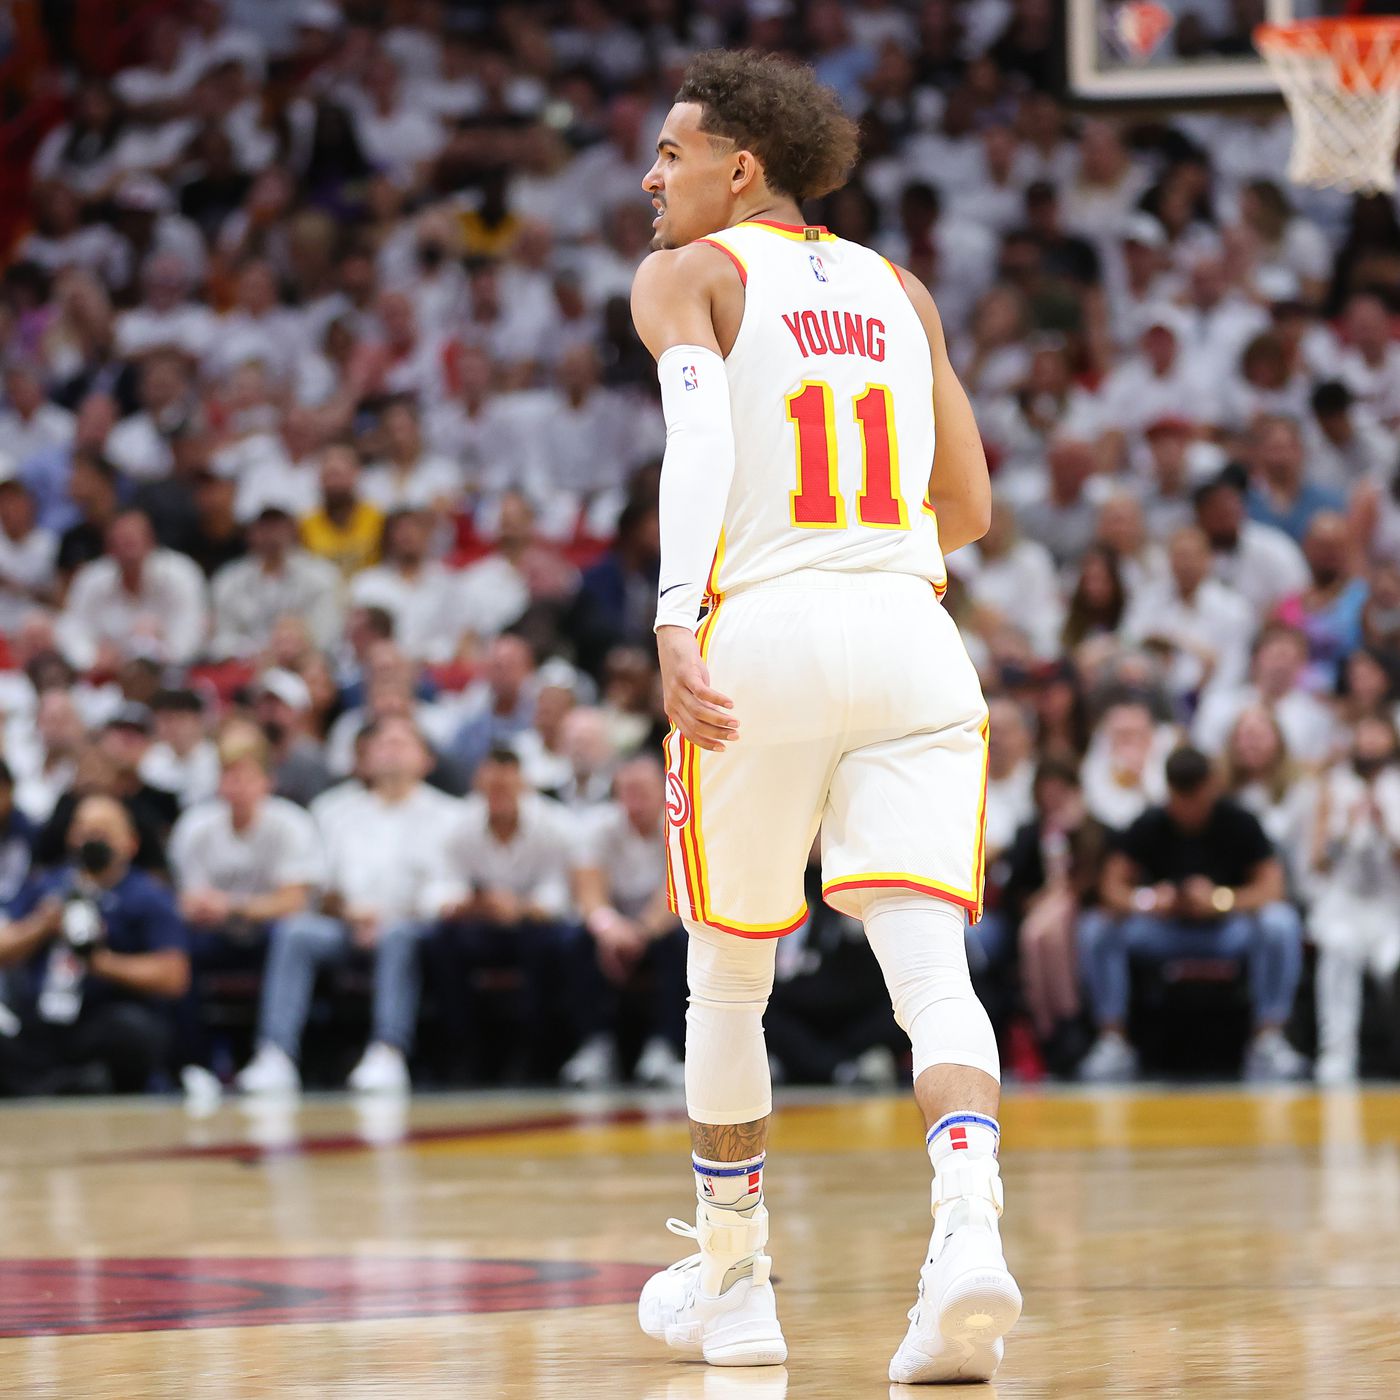 2021-22 Atlanta Hawks player review: Trae Young - Peachtree Hoops